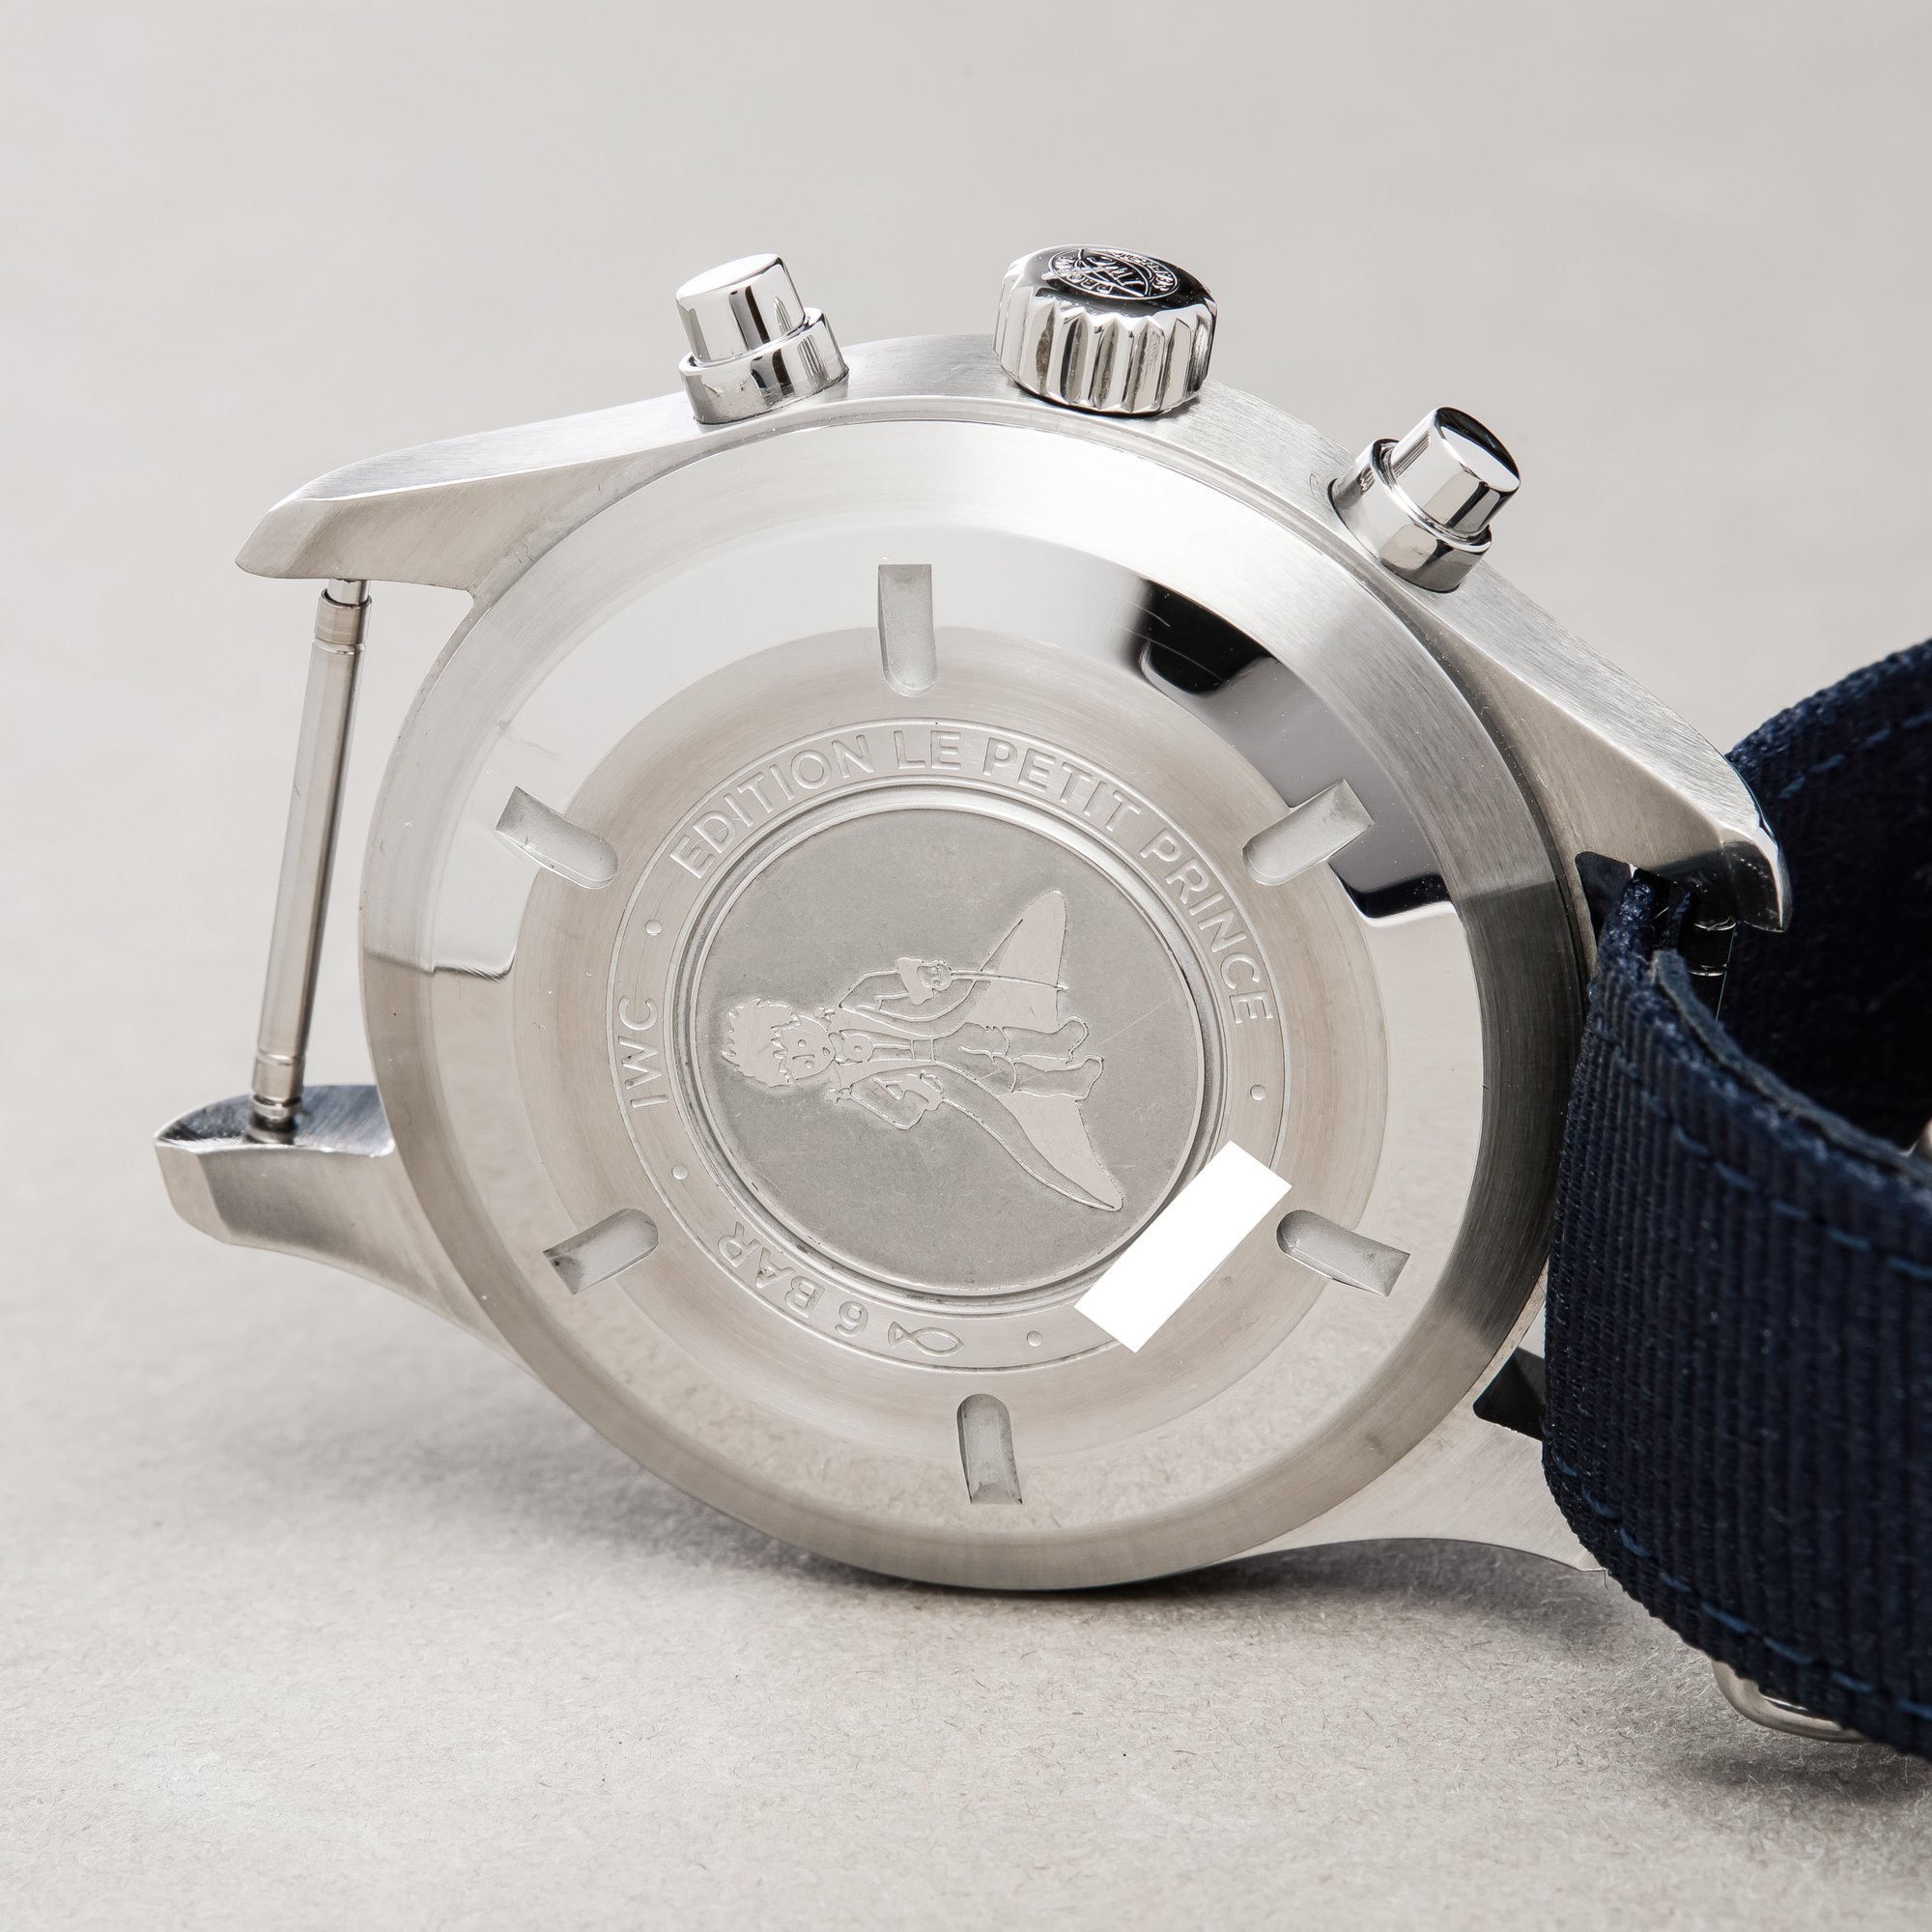 IWC Pilot's Chronograph “LE PETIT PRINCE” Stainless Steel IW377714